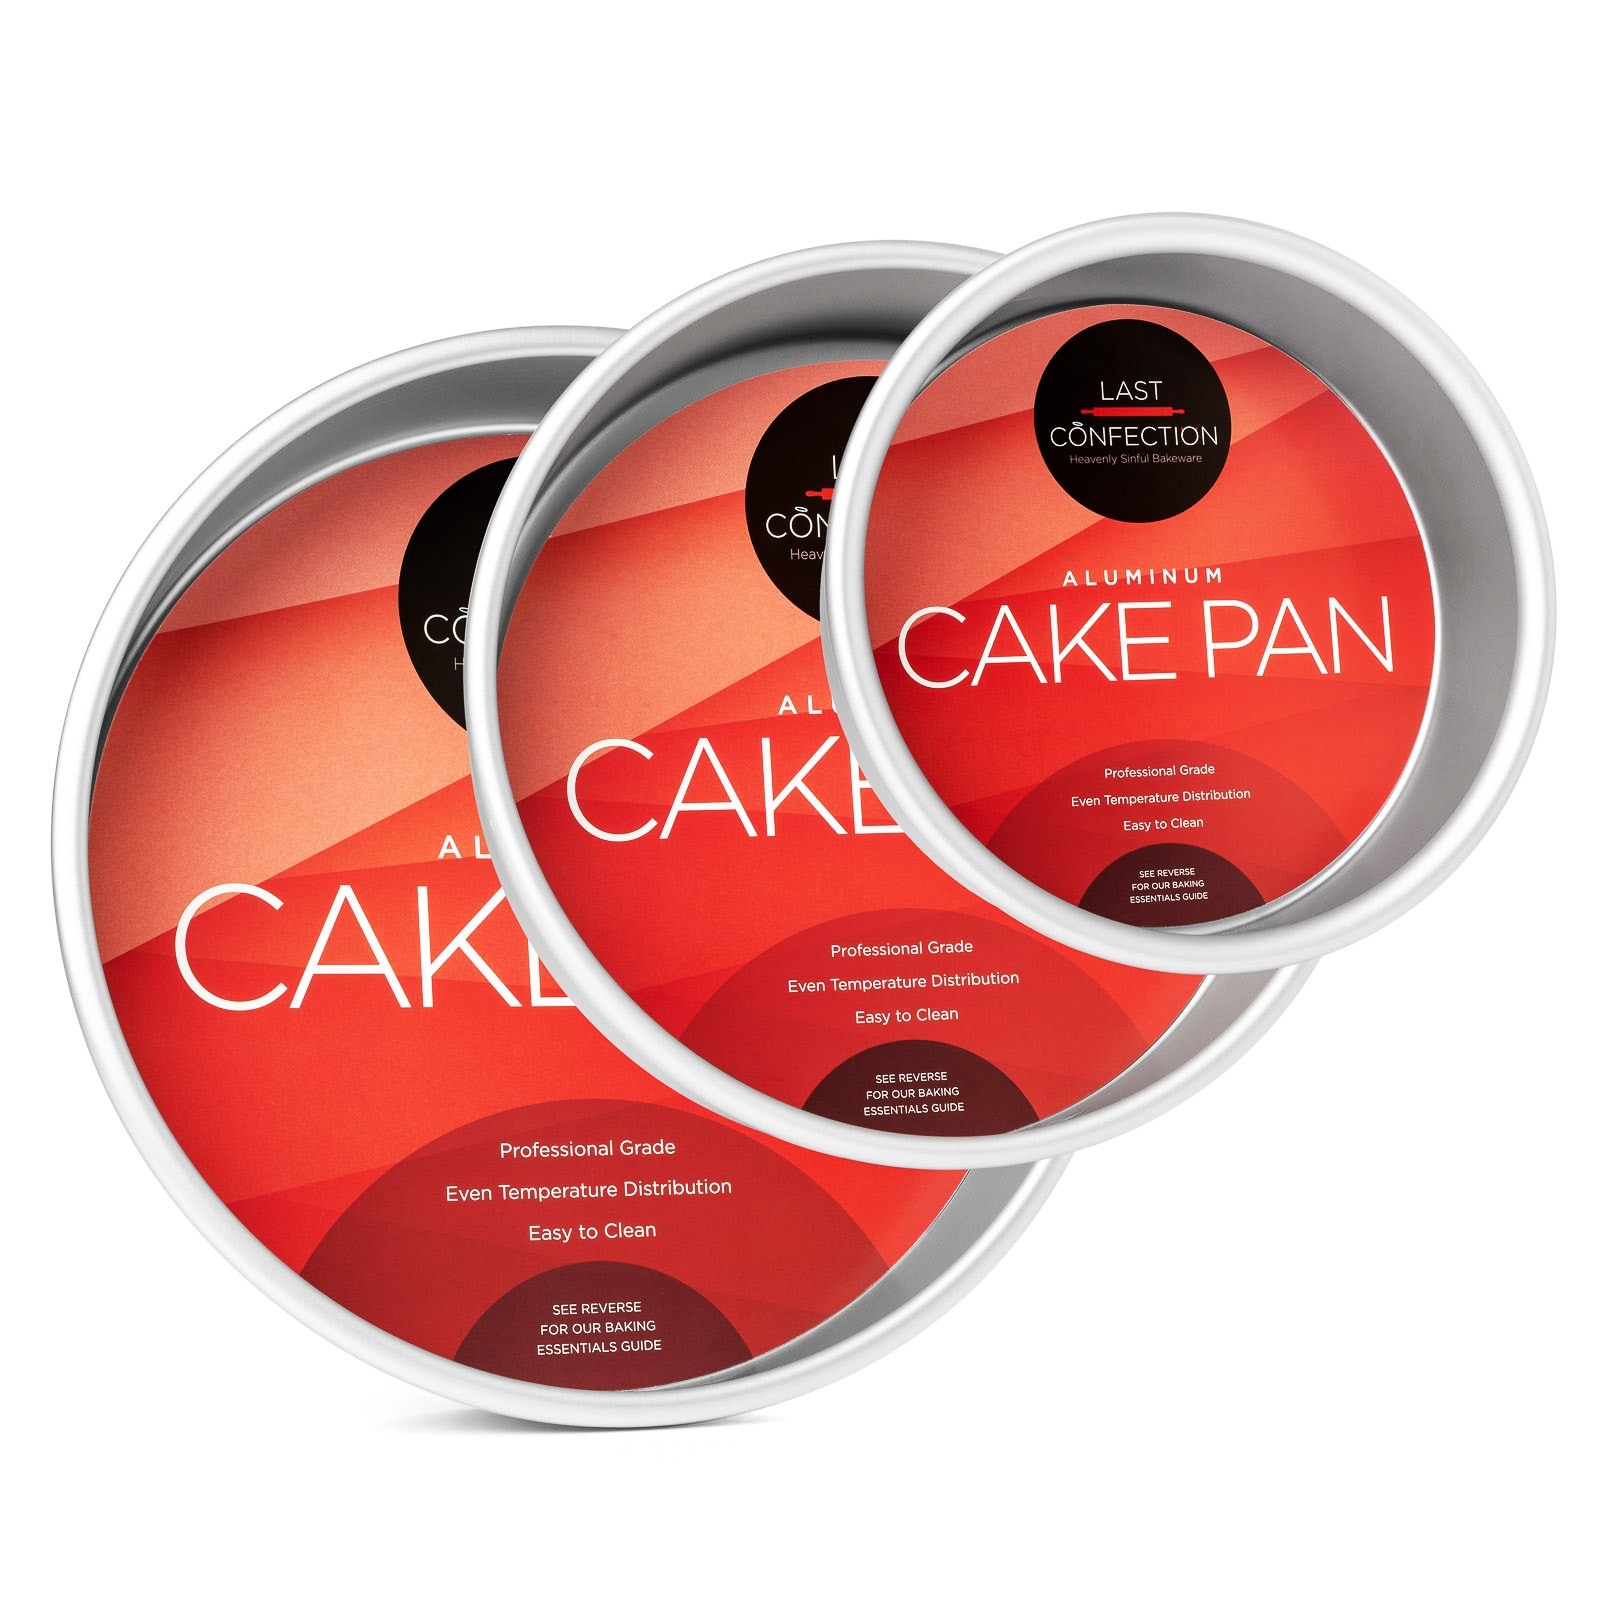 https://ak1.ostkcdn.com/images/products/is/images/direct/9d9f14ff028bdcbbe4aef669e13212ffba3ad402/Round-Aluminum-Cake-Pan-Sets---Last-Confection.jpg